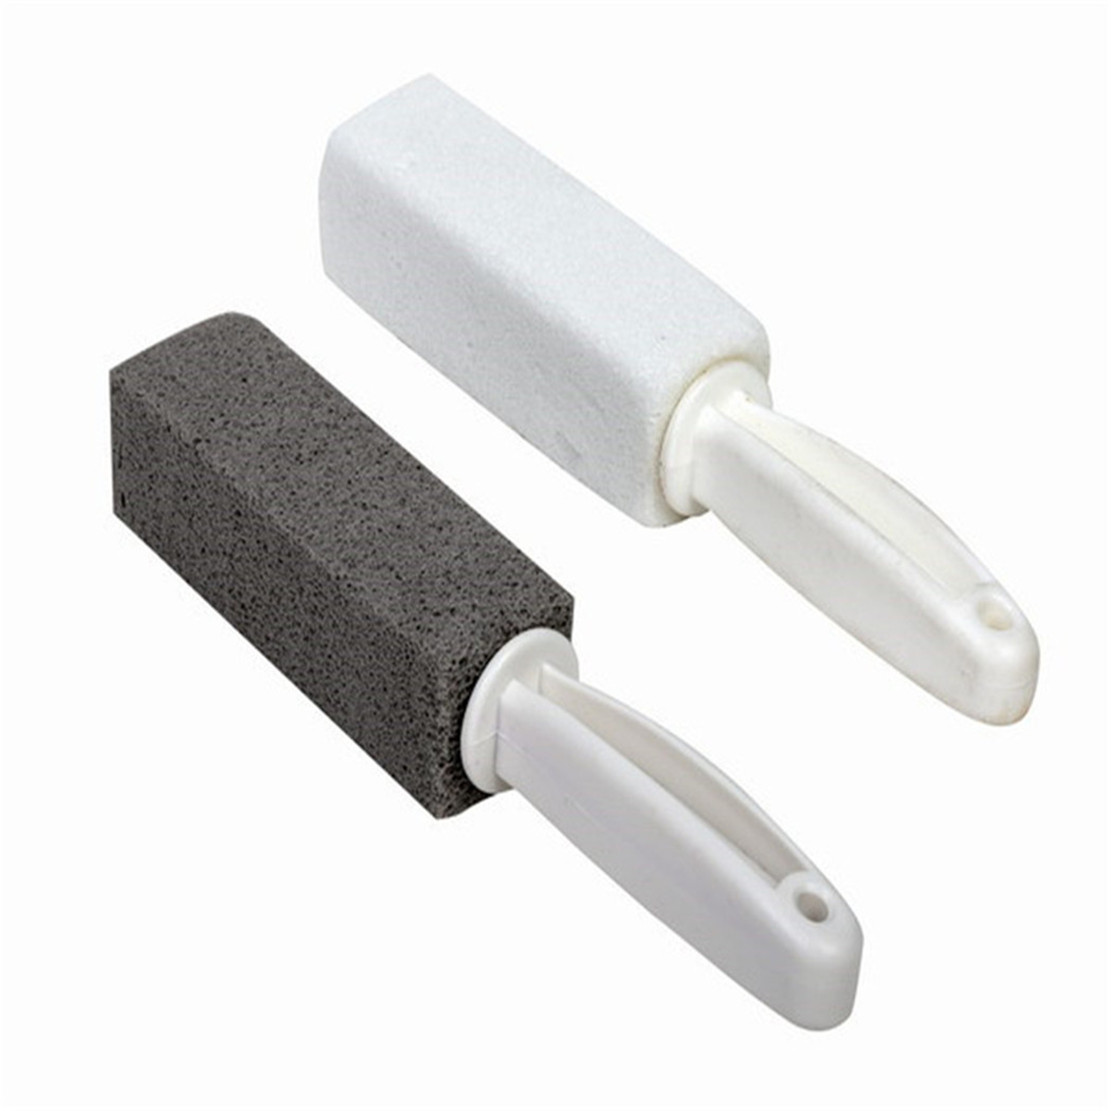 plastic handle toilet bowl ring remover pumice stick